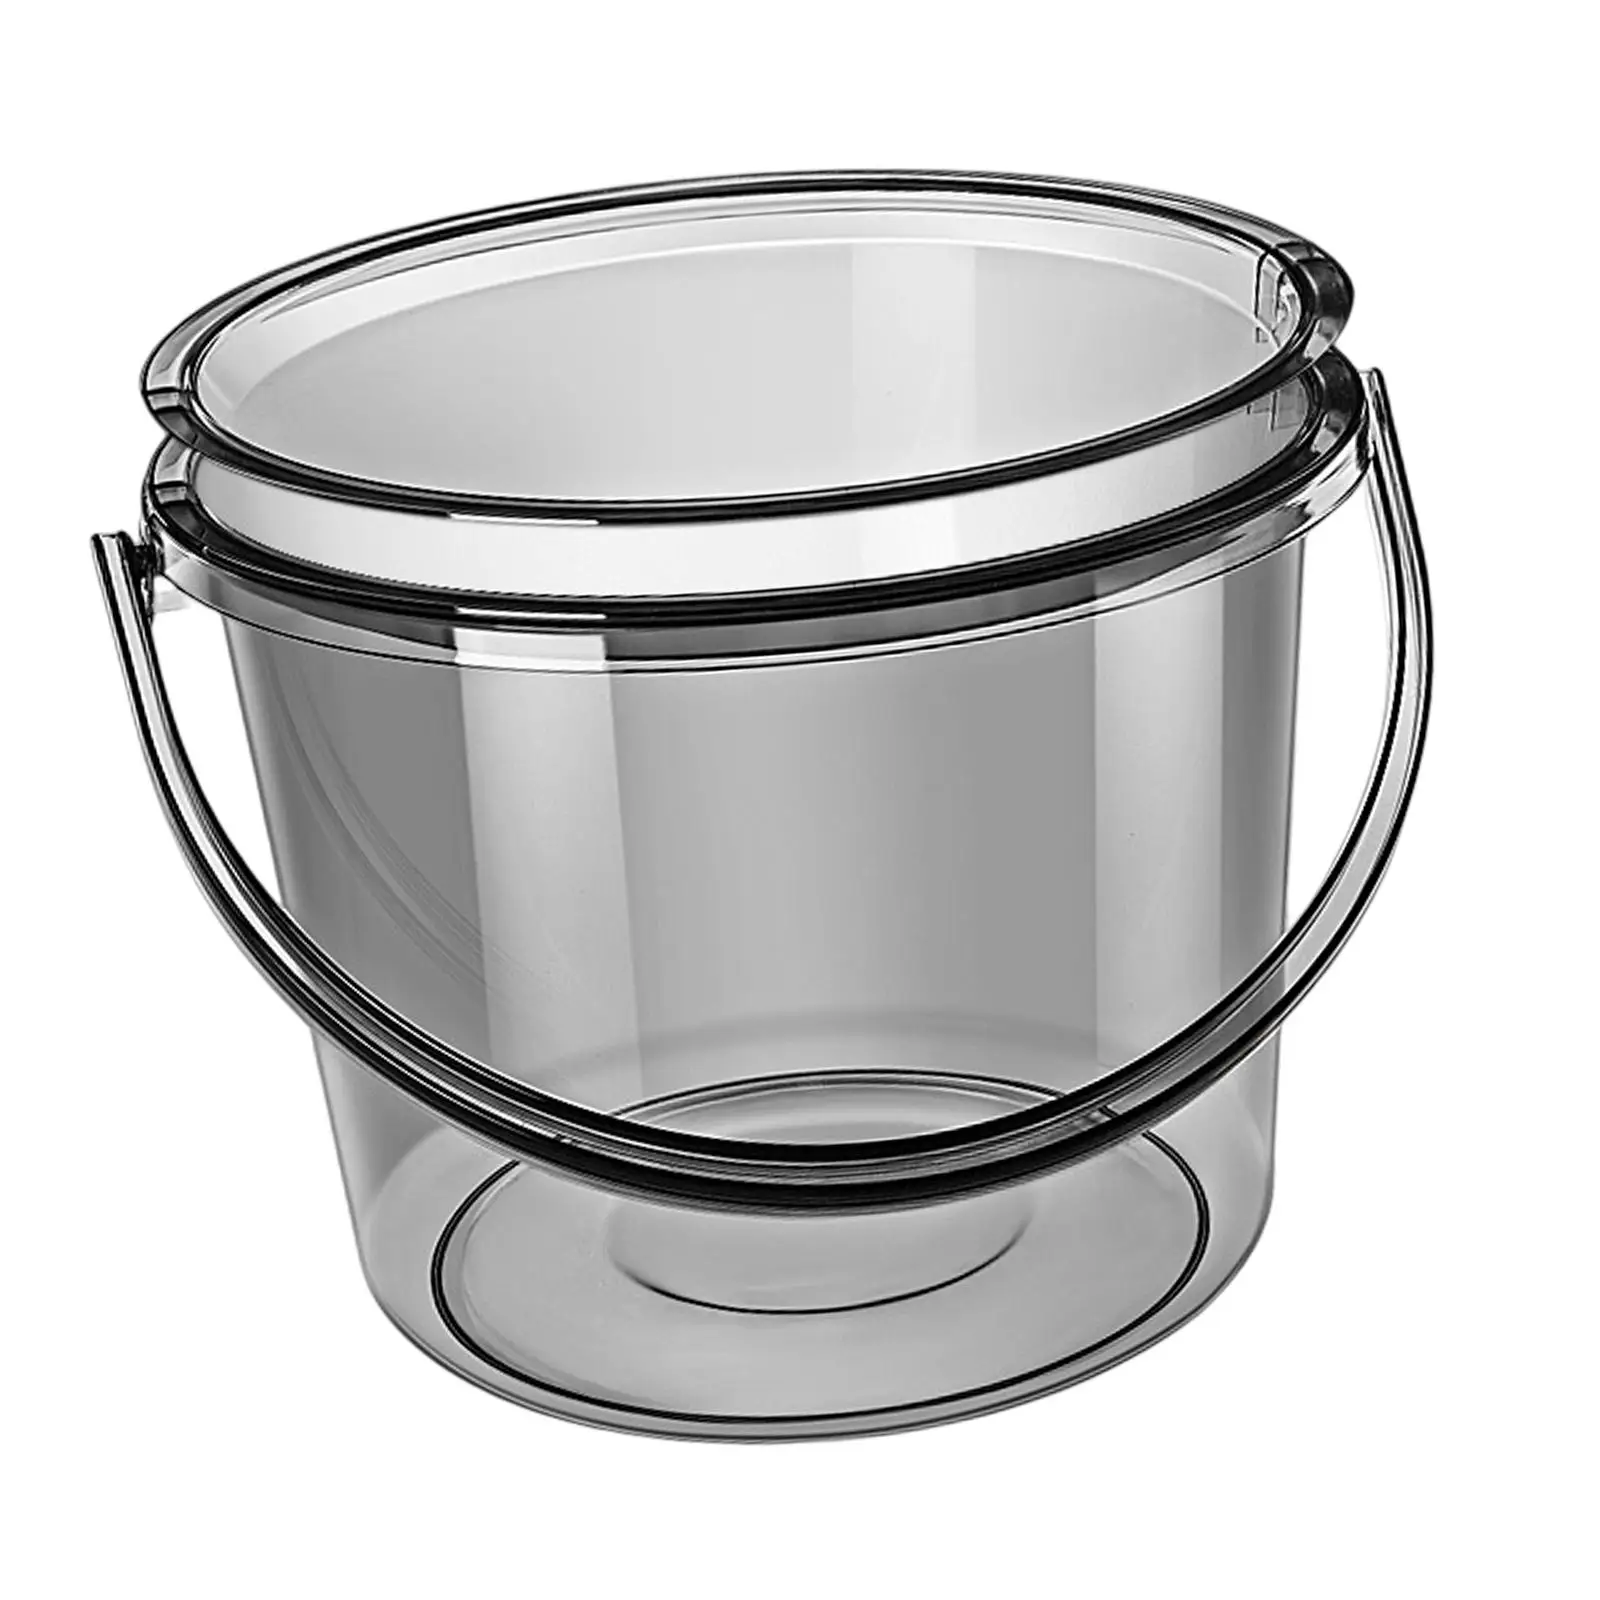 Water Bucket with Lid Fishing Bucket Cleaning Bucket for Household Use for Gardening